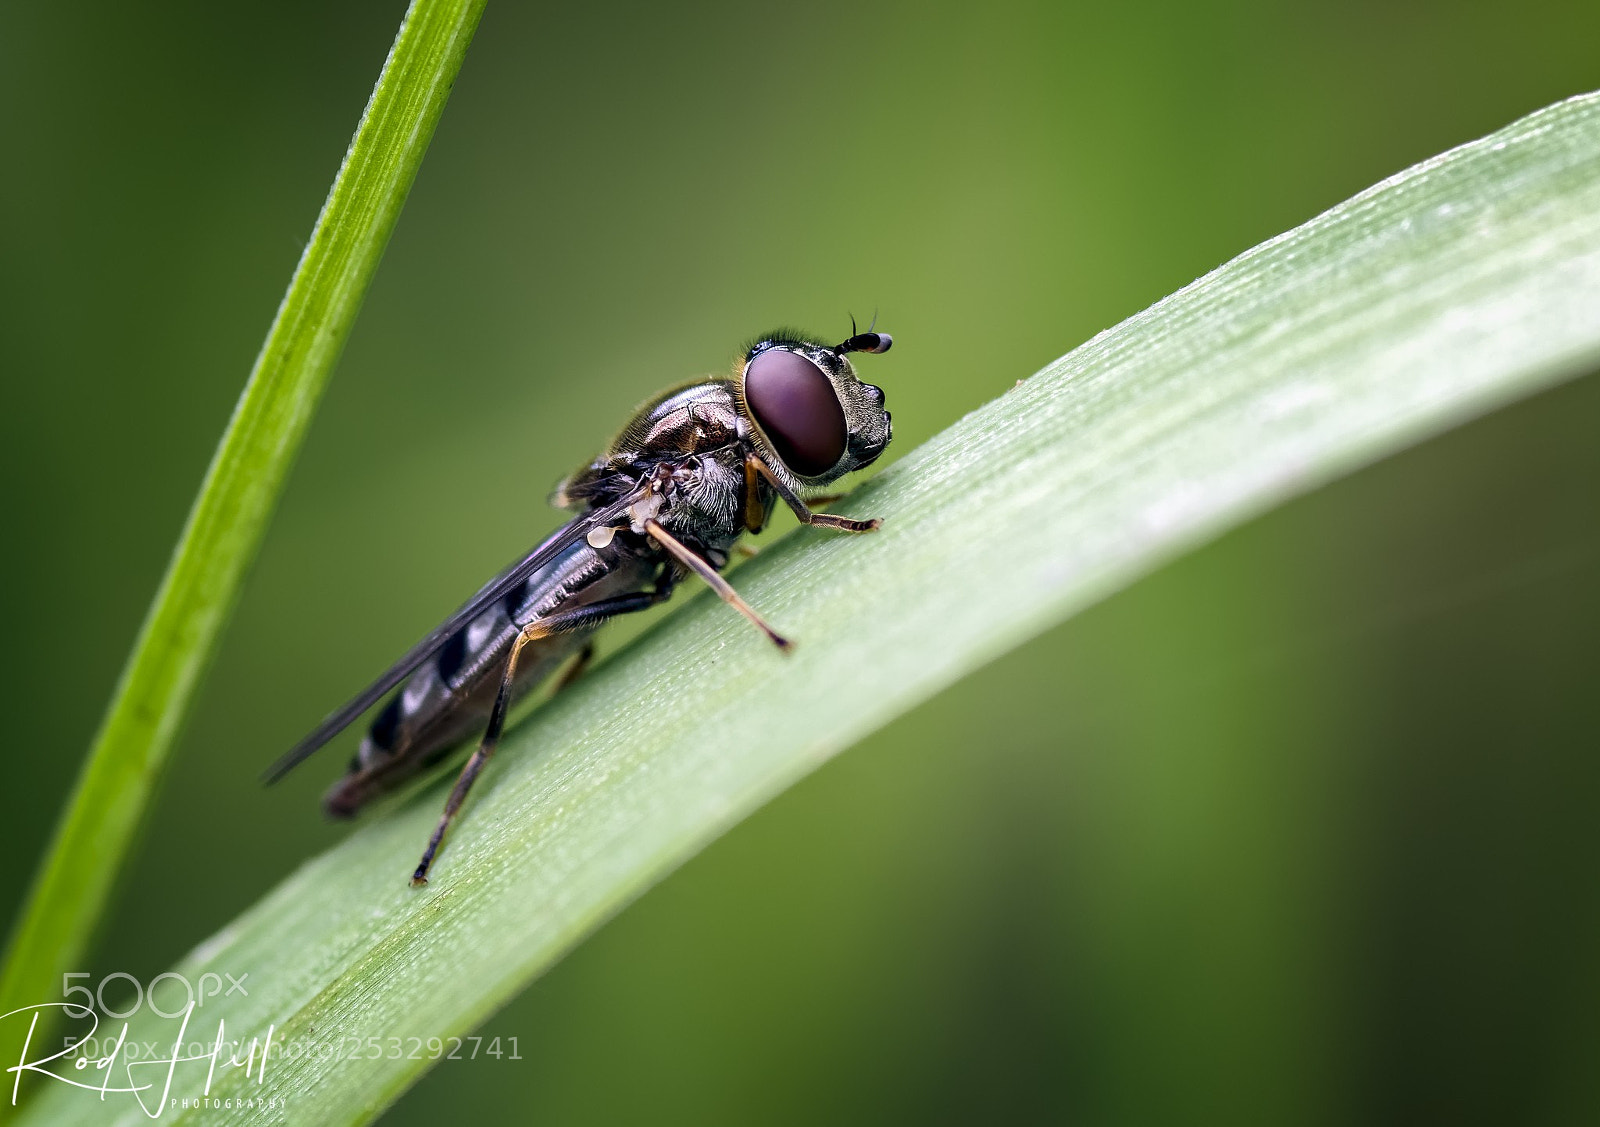 Pentax K-3 II sample photo. Hoverfly on grass blade photography